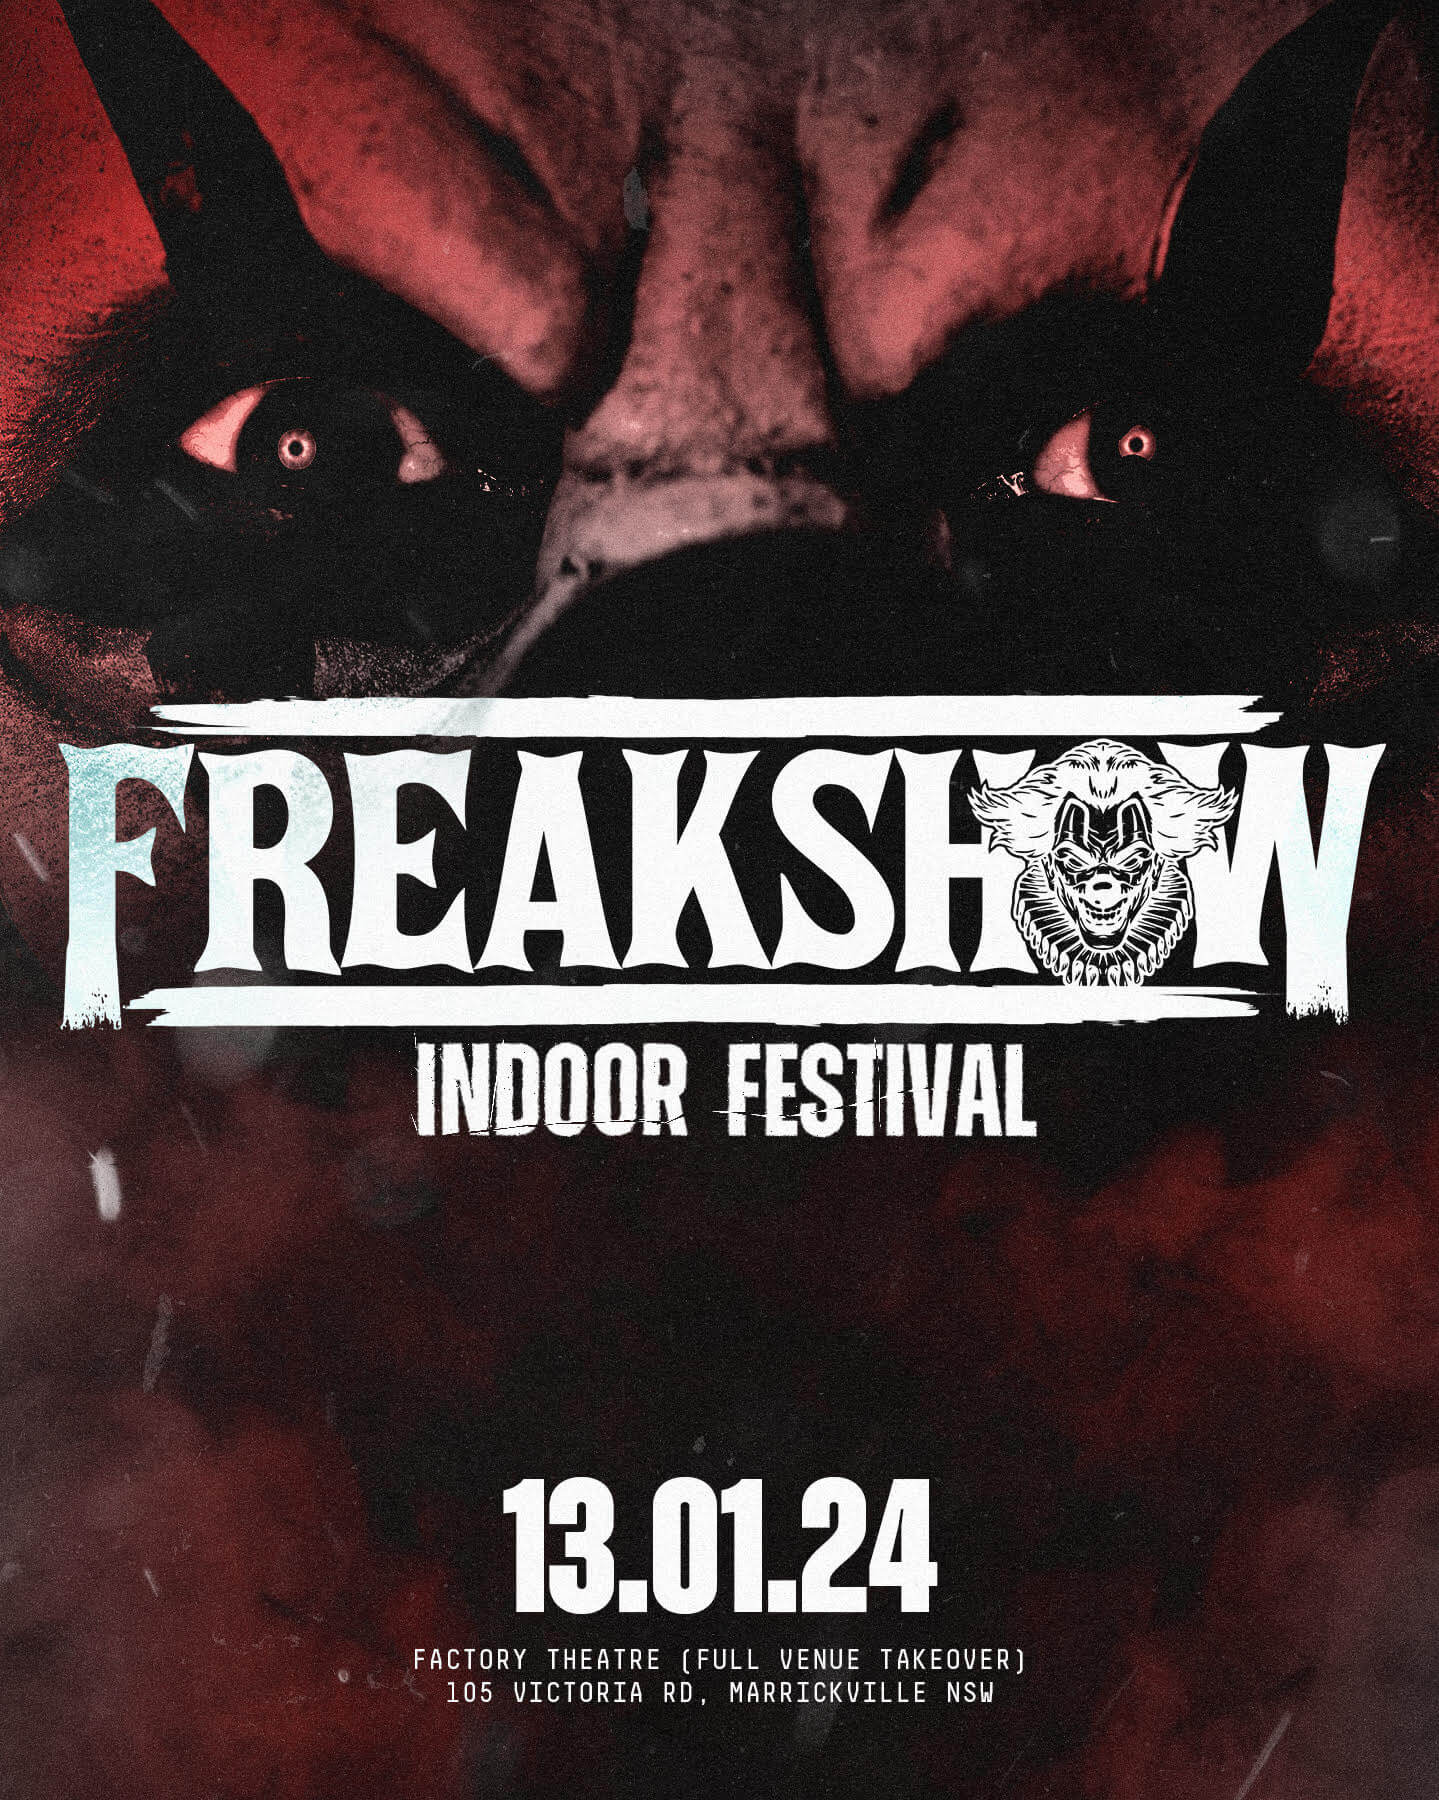 FREAKSHOW EXCLUSIVE OFFER